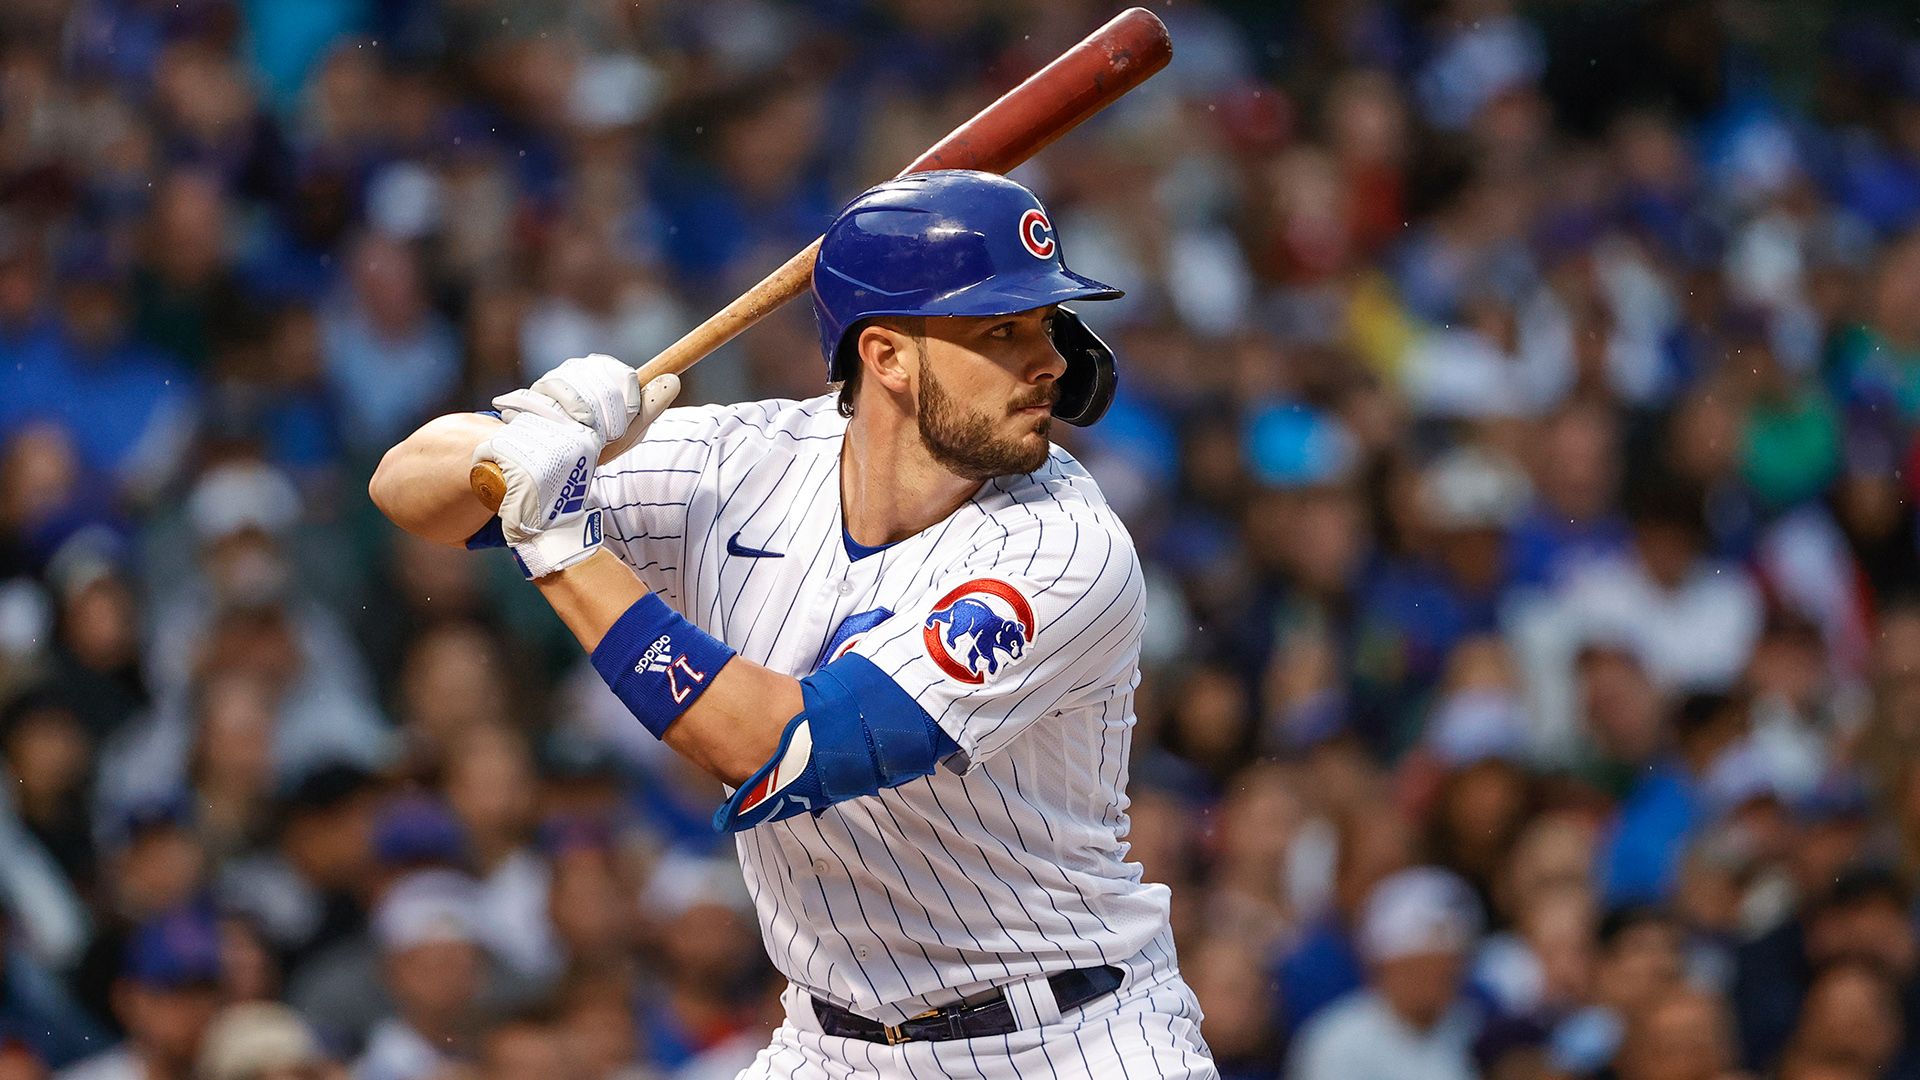 Cubs' Kris Bryant said he doesn't focus on trade rumors – NBC Sports Chicago